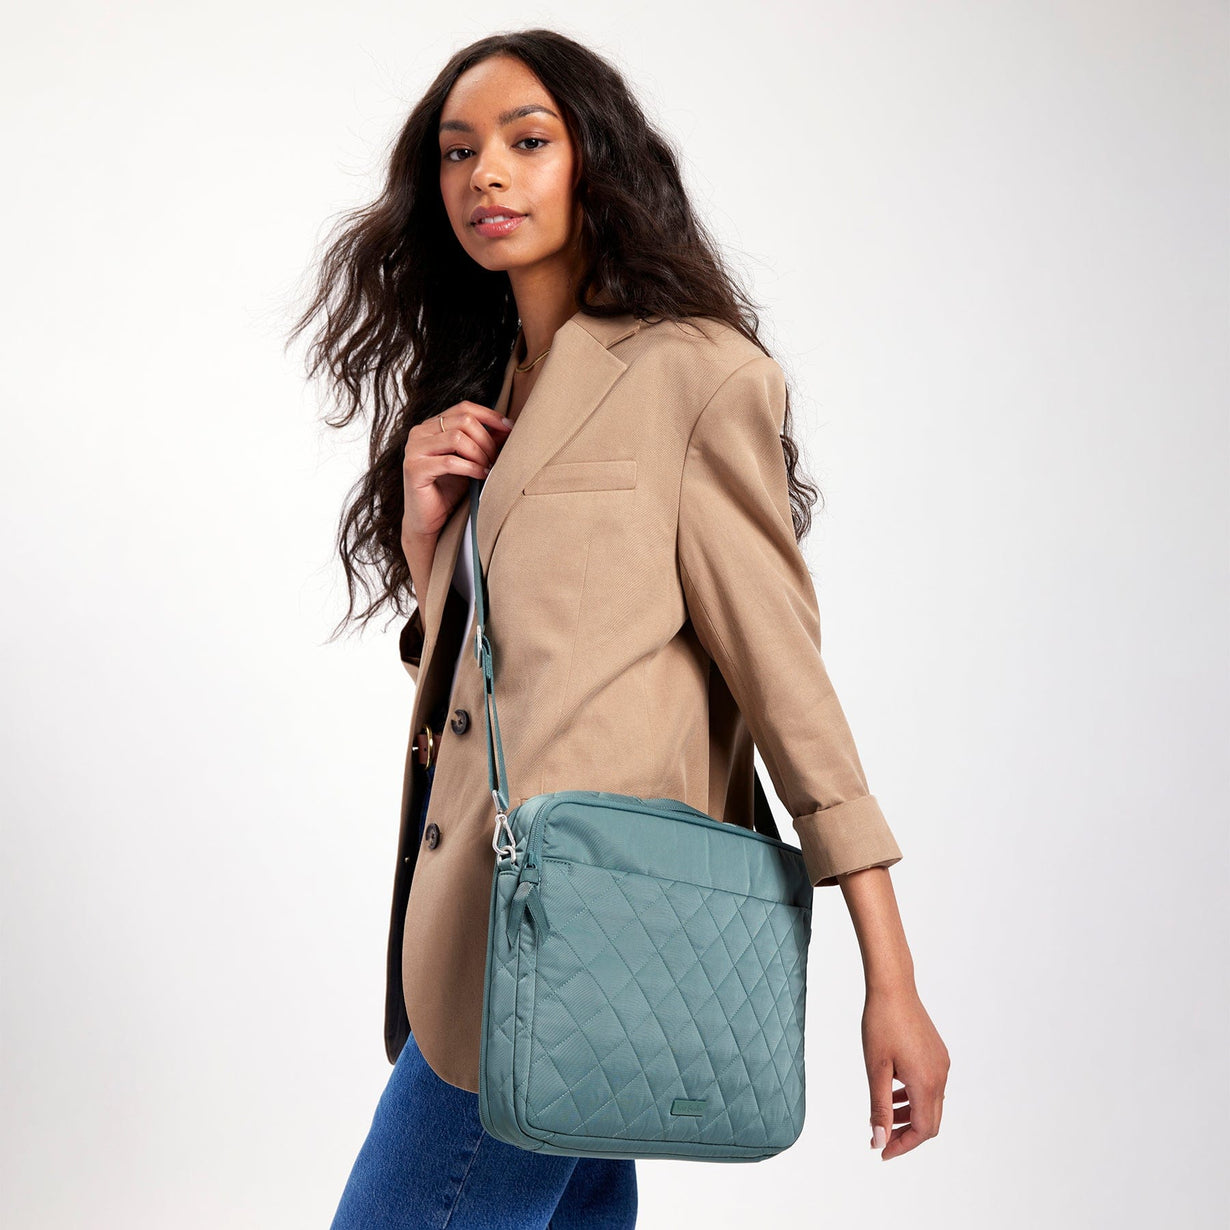 model wearing camel blazer and jeans carrying a lightweight crossbody laptop bag